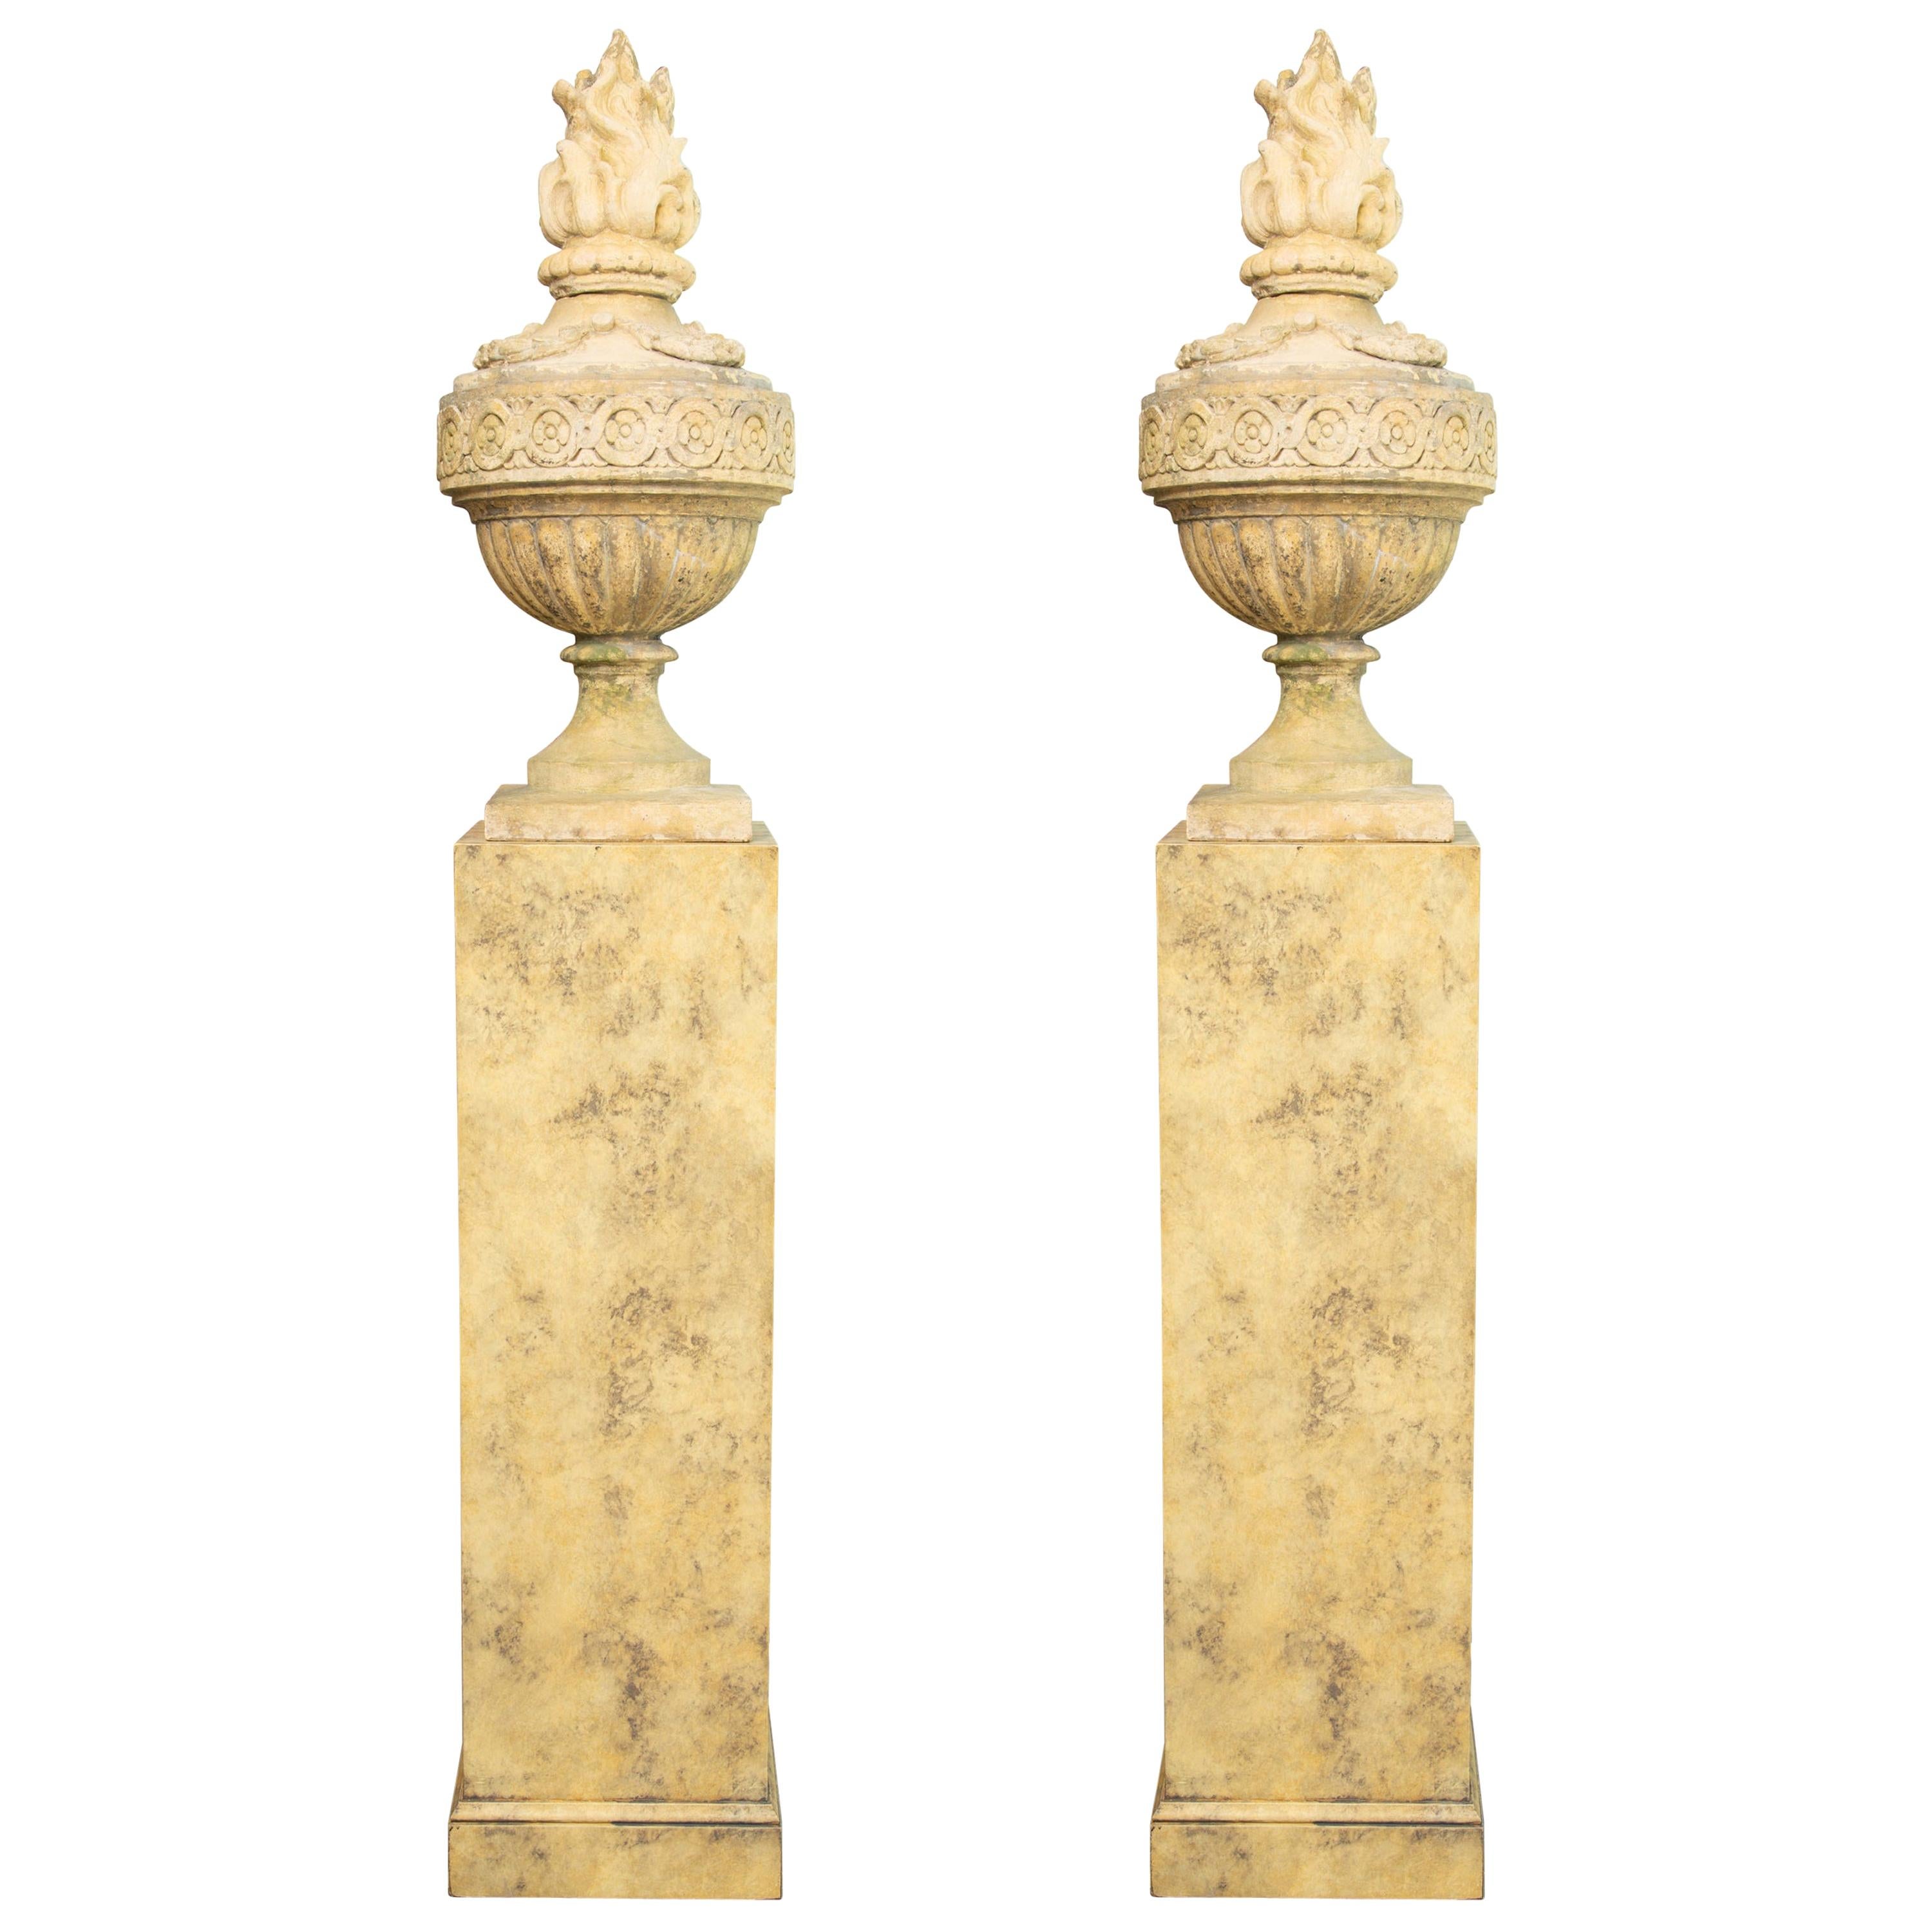 Pair of Stone Cast English Urns on Faux Marble Pedestals